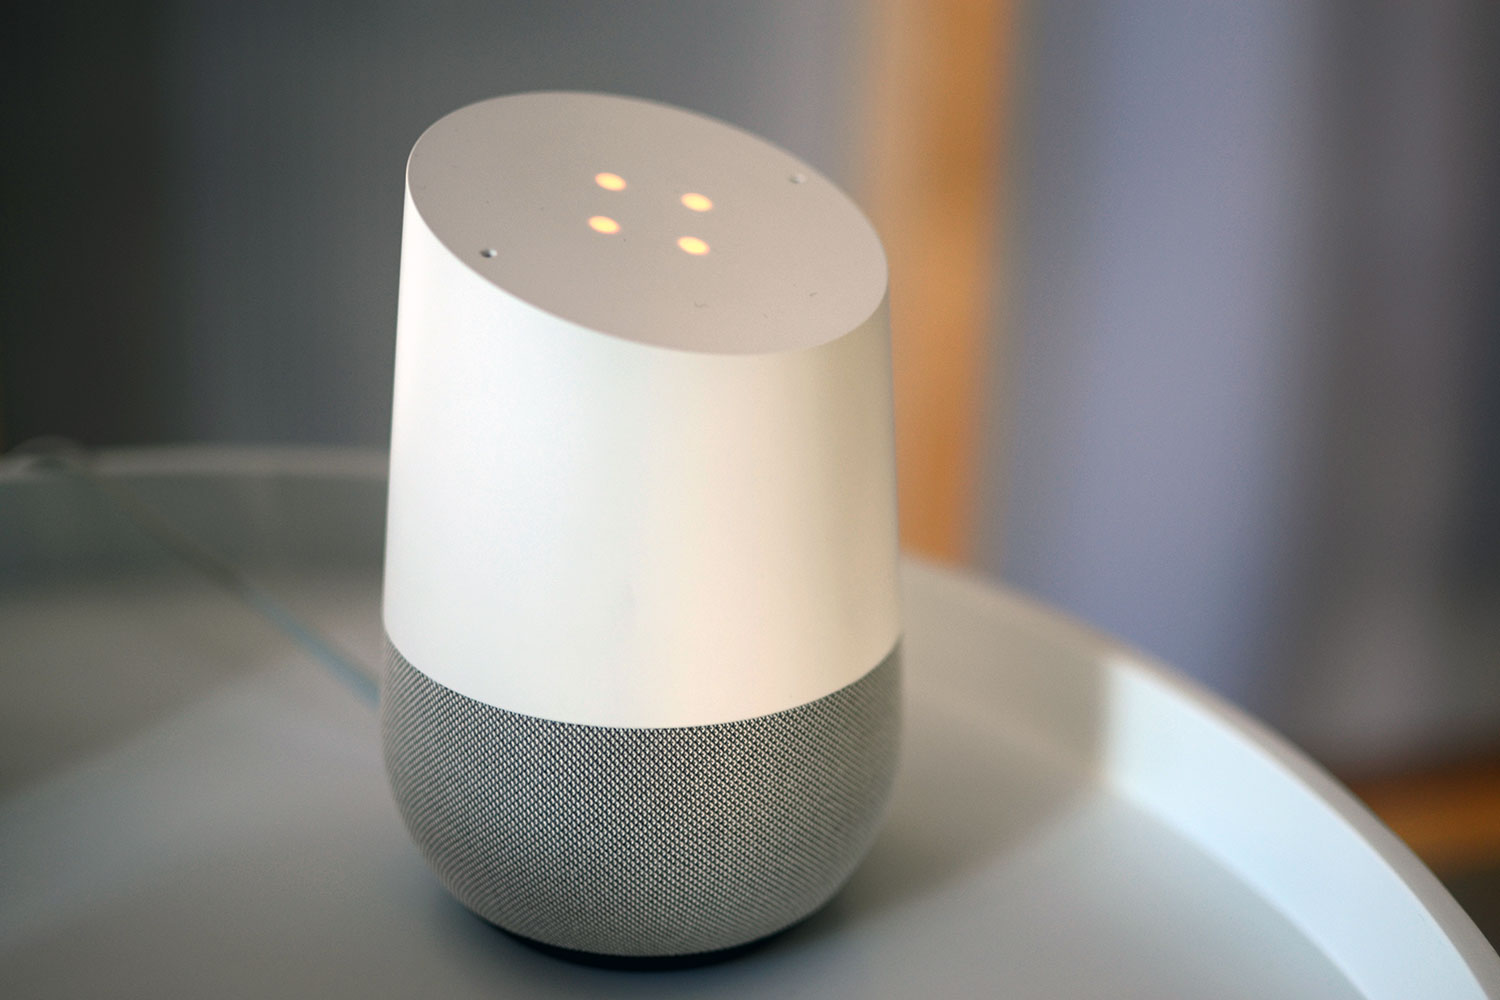 Hands on: Google Home